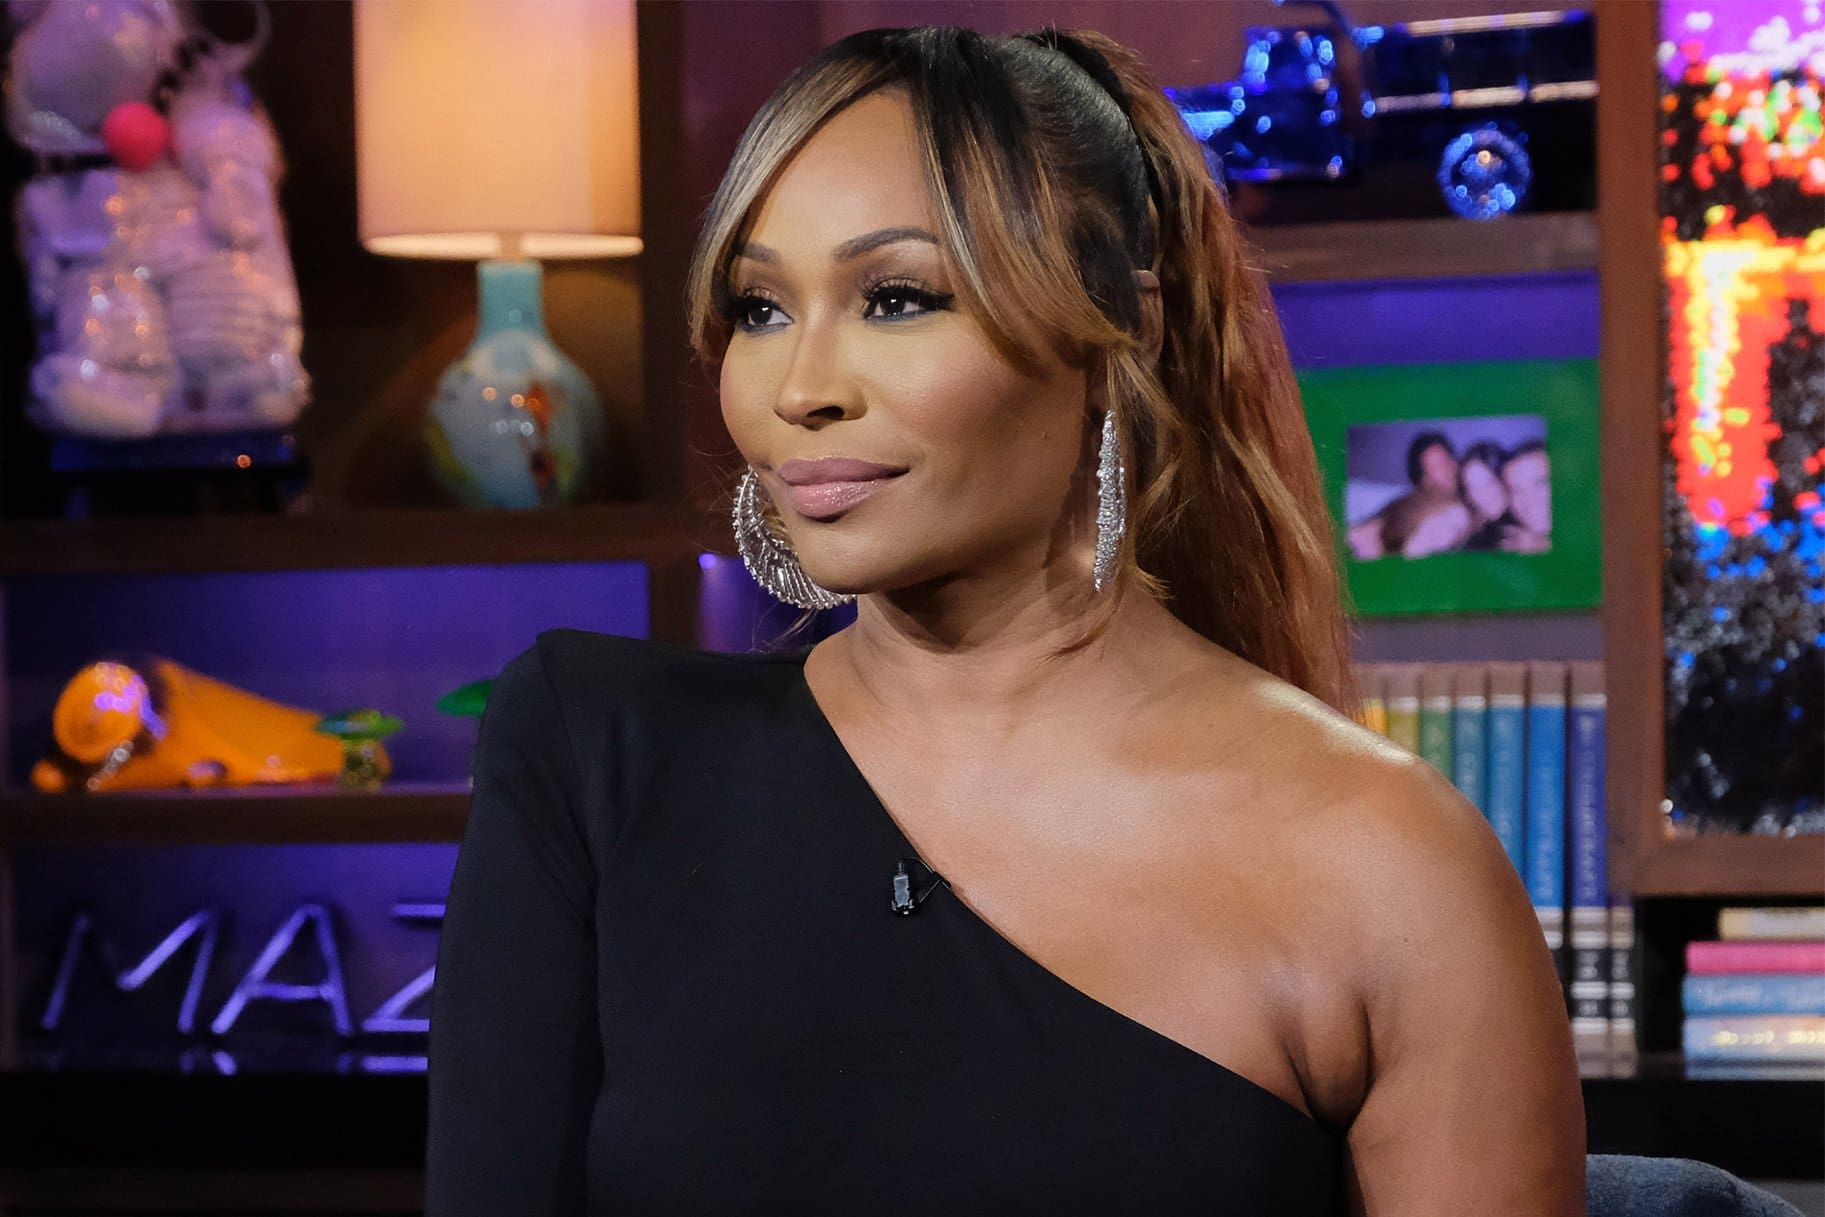 Cynthia Bailey Takes A Walk With Mike Hill And Addresses fans During This Stressful Crisis - See The Video